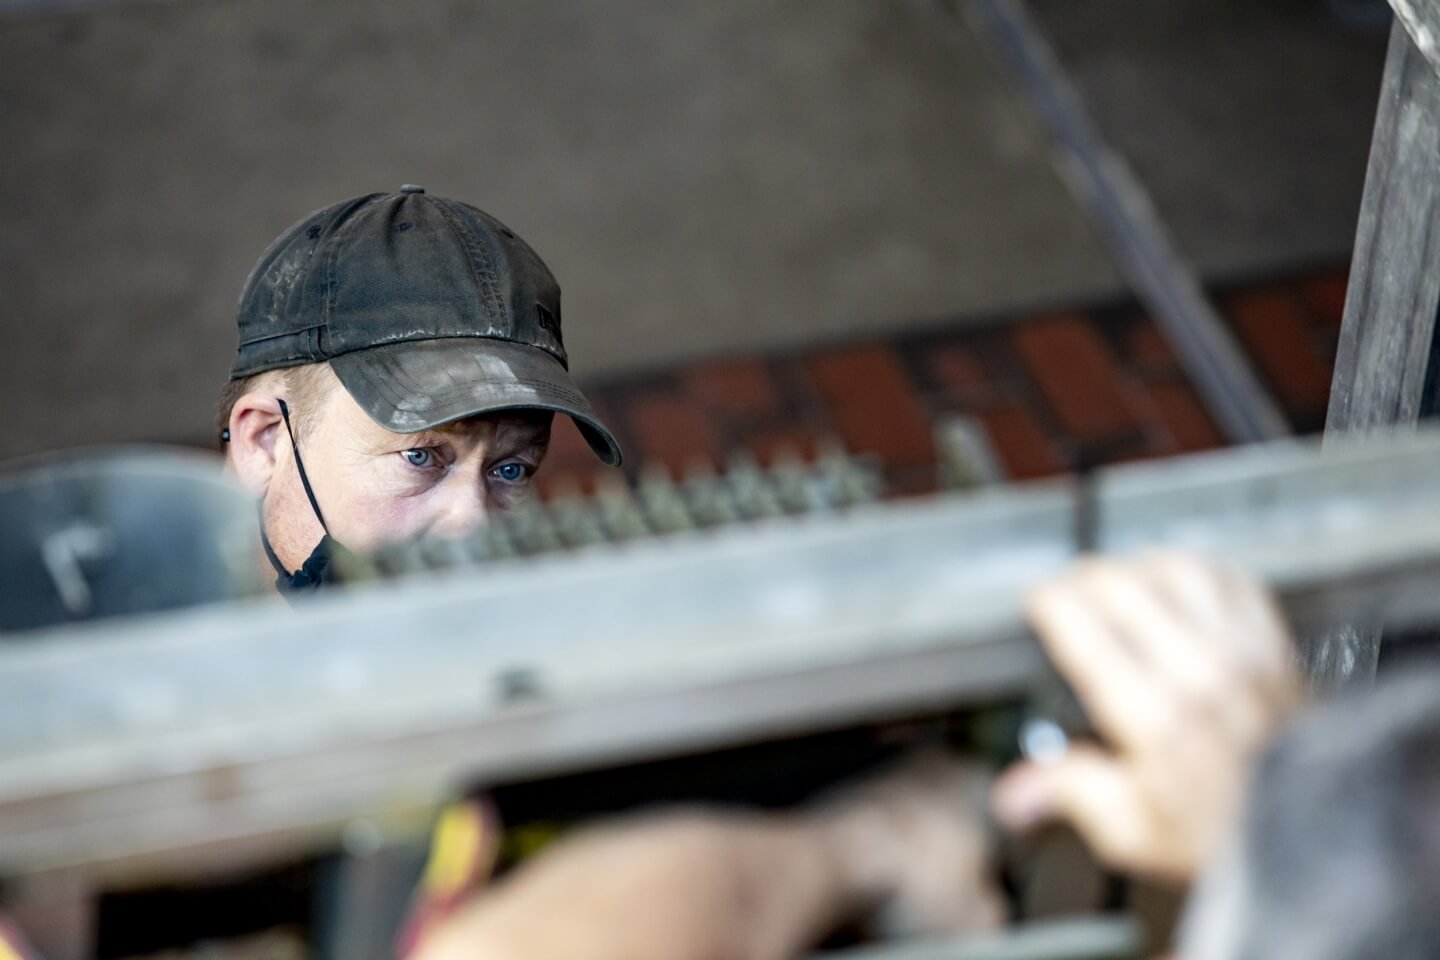 A foreman looks upward at a blurred view of the Mark I.